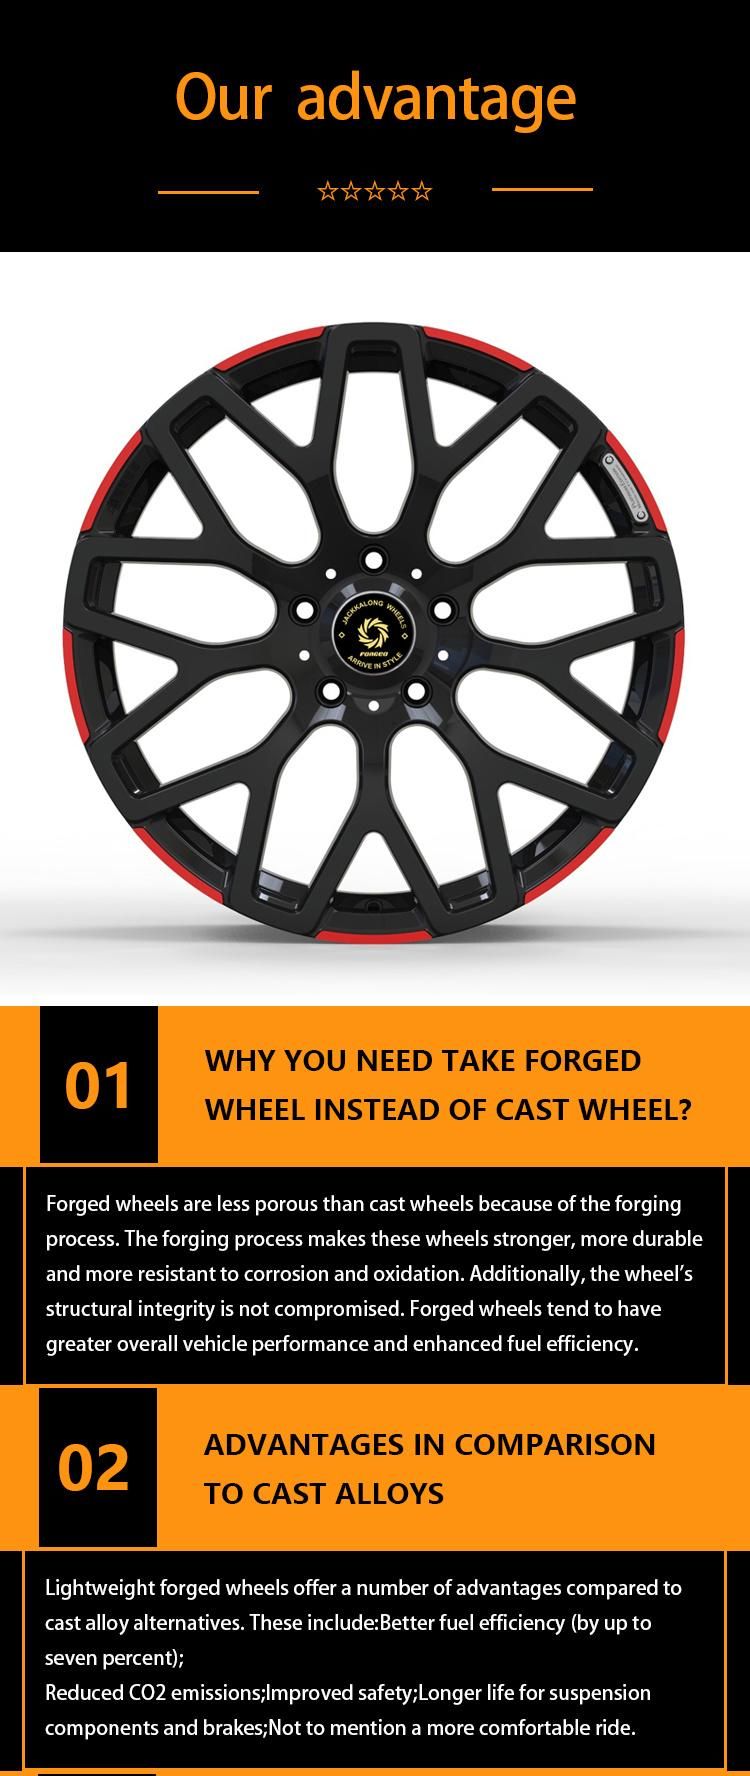 2 Piece Forged T6061 Alloy Rims Wheels for Customized T6061 Material with Mag Rims with Gloss Black +Red Finish Color 